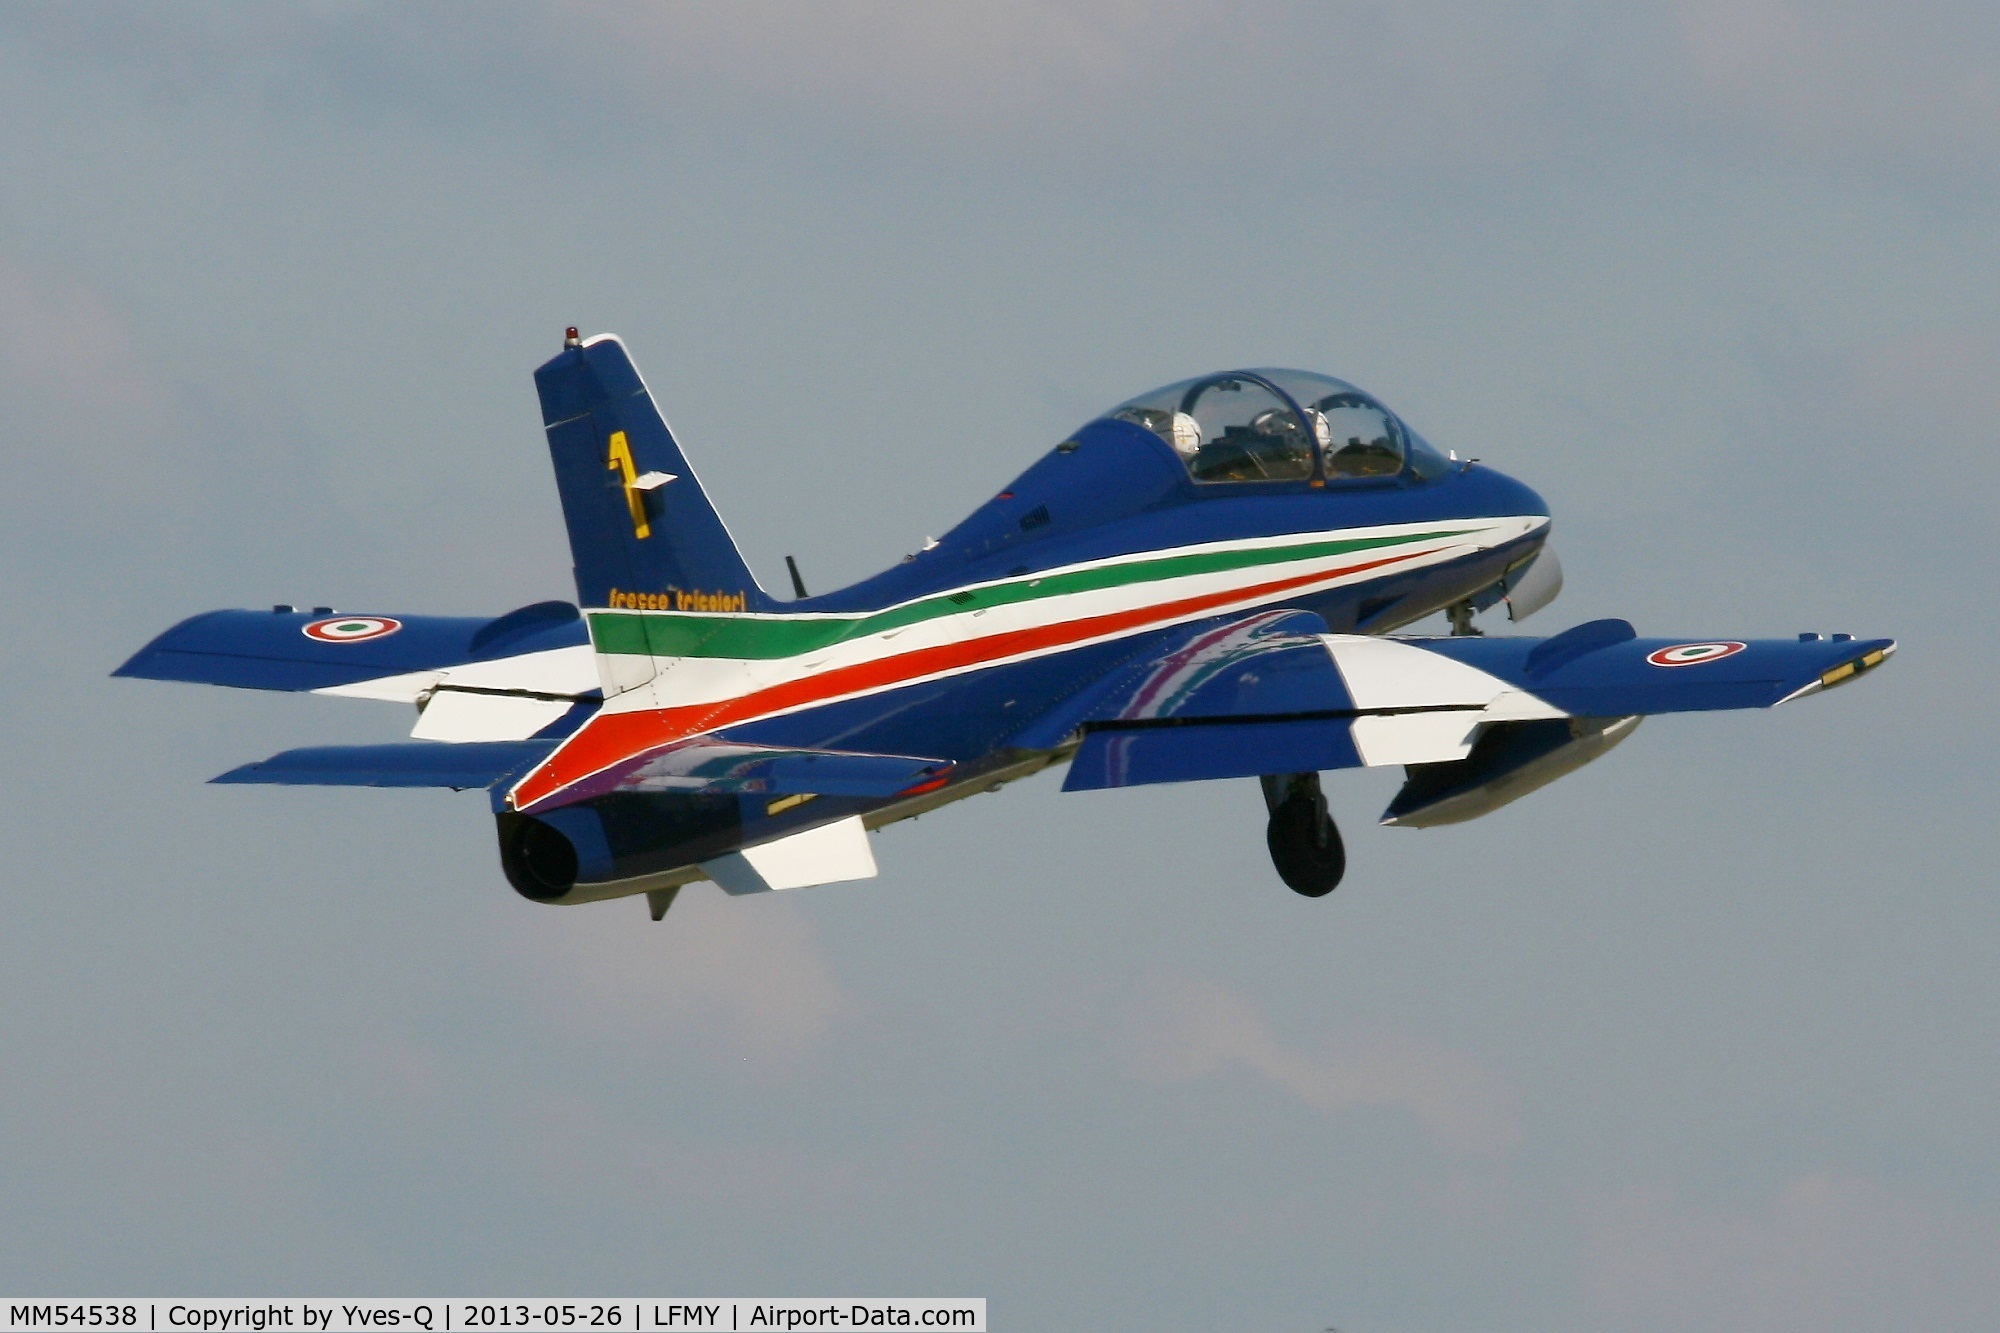 MM54538, Aermacchi MB-339PAN C/N 6759/154/AA070, Italian Air Force Aermacchi MB-339PAN, Number 1 in may 2013, Frecce Tricolori Aerobatic Team Leader, Salon De Provence Air Base 701 (LFMY) Open day 2013